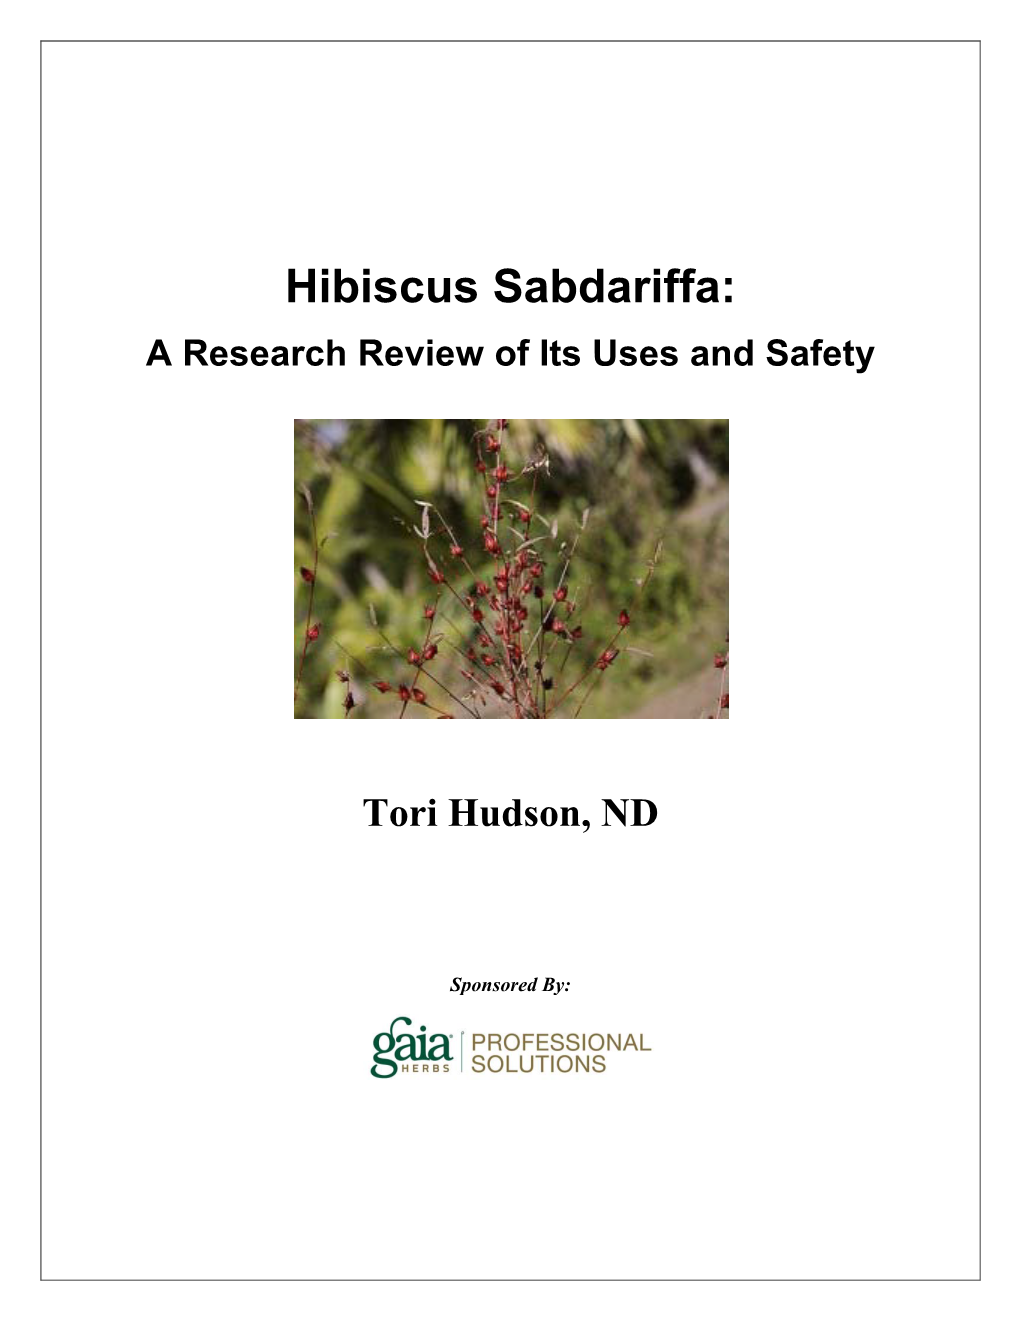 A Research Review on the Use of Hibiscus Sabdariffa